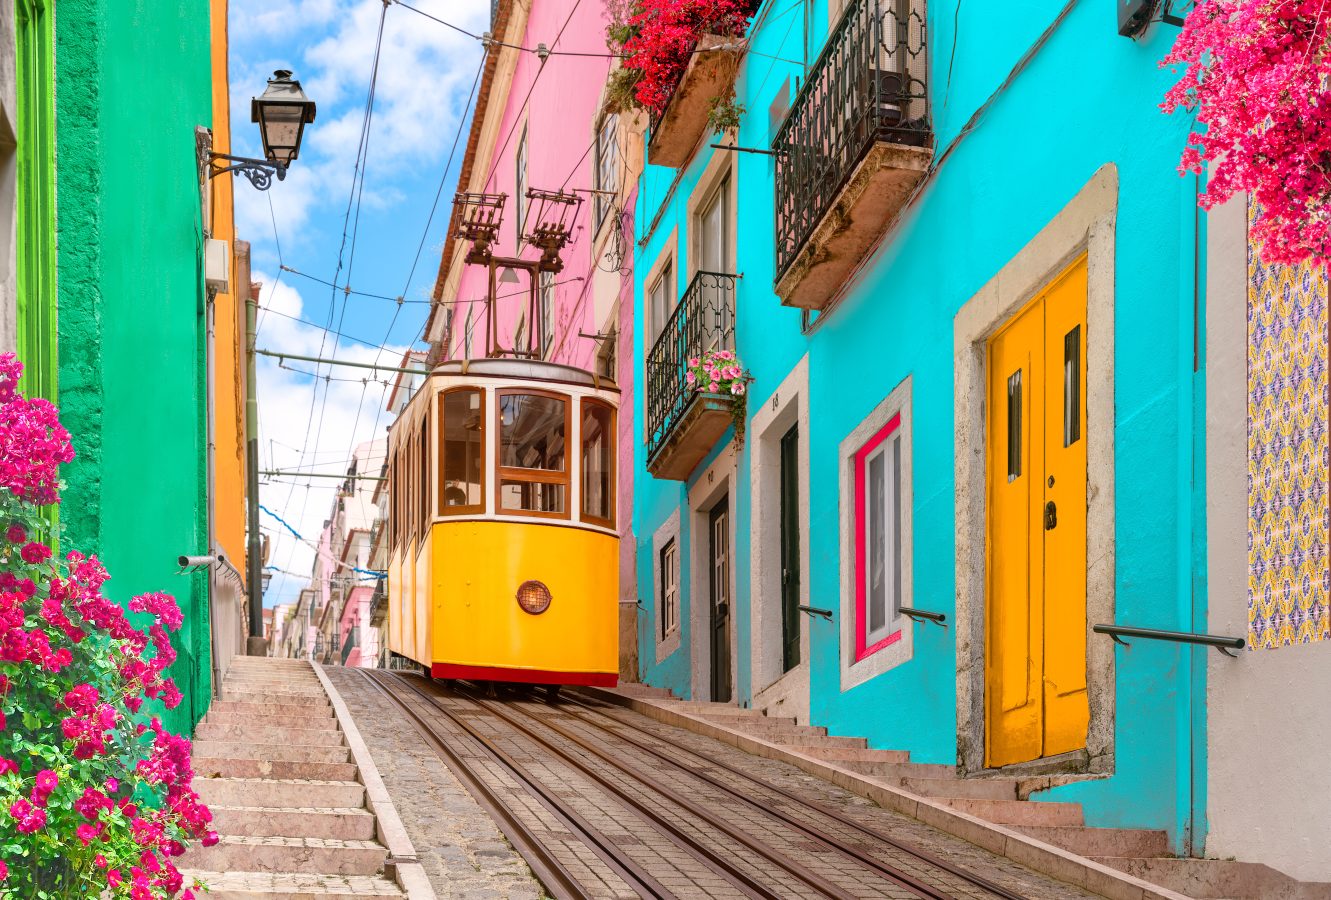 Yellow tram on a street with colorful houses and flowers on the balconies in Lisbon, Portugal.